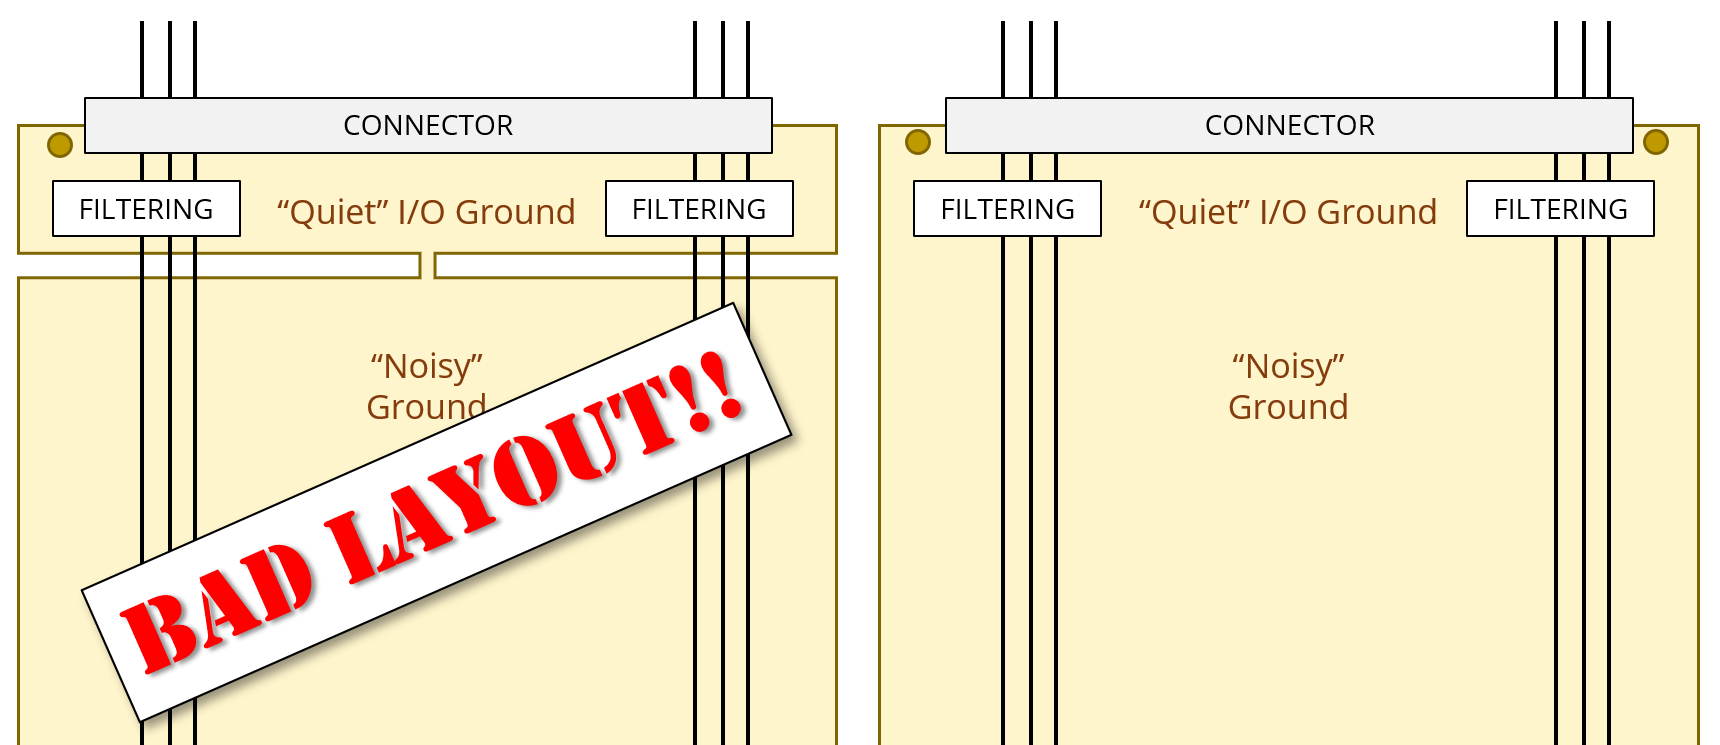 Good and bad circuit board ground layouts. The bad layout isolates the "quiet ground" from the "noisy ground" with a gap in the plane and a single-point connection.